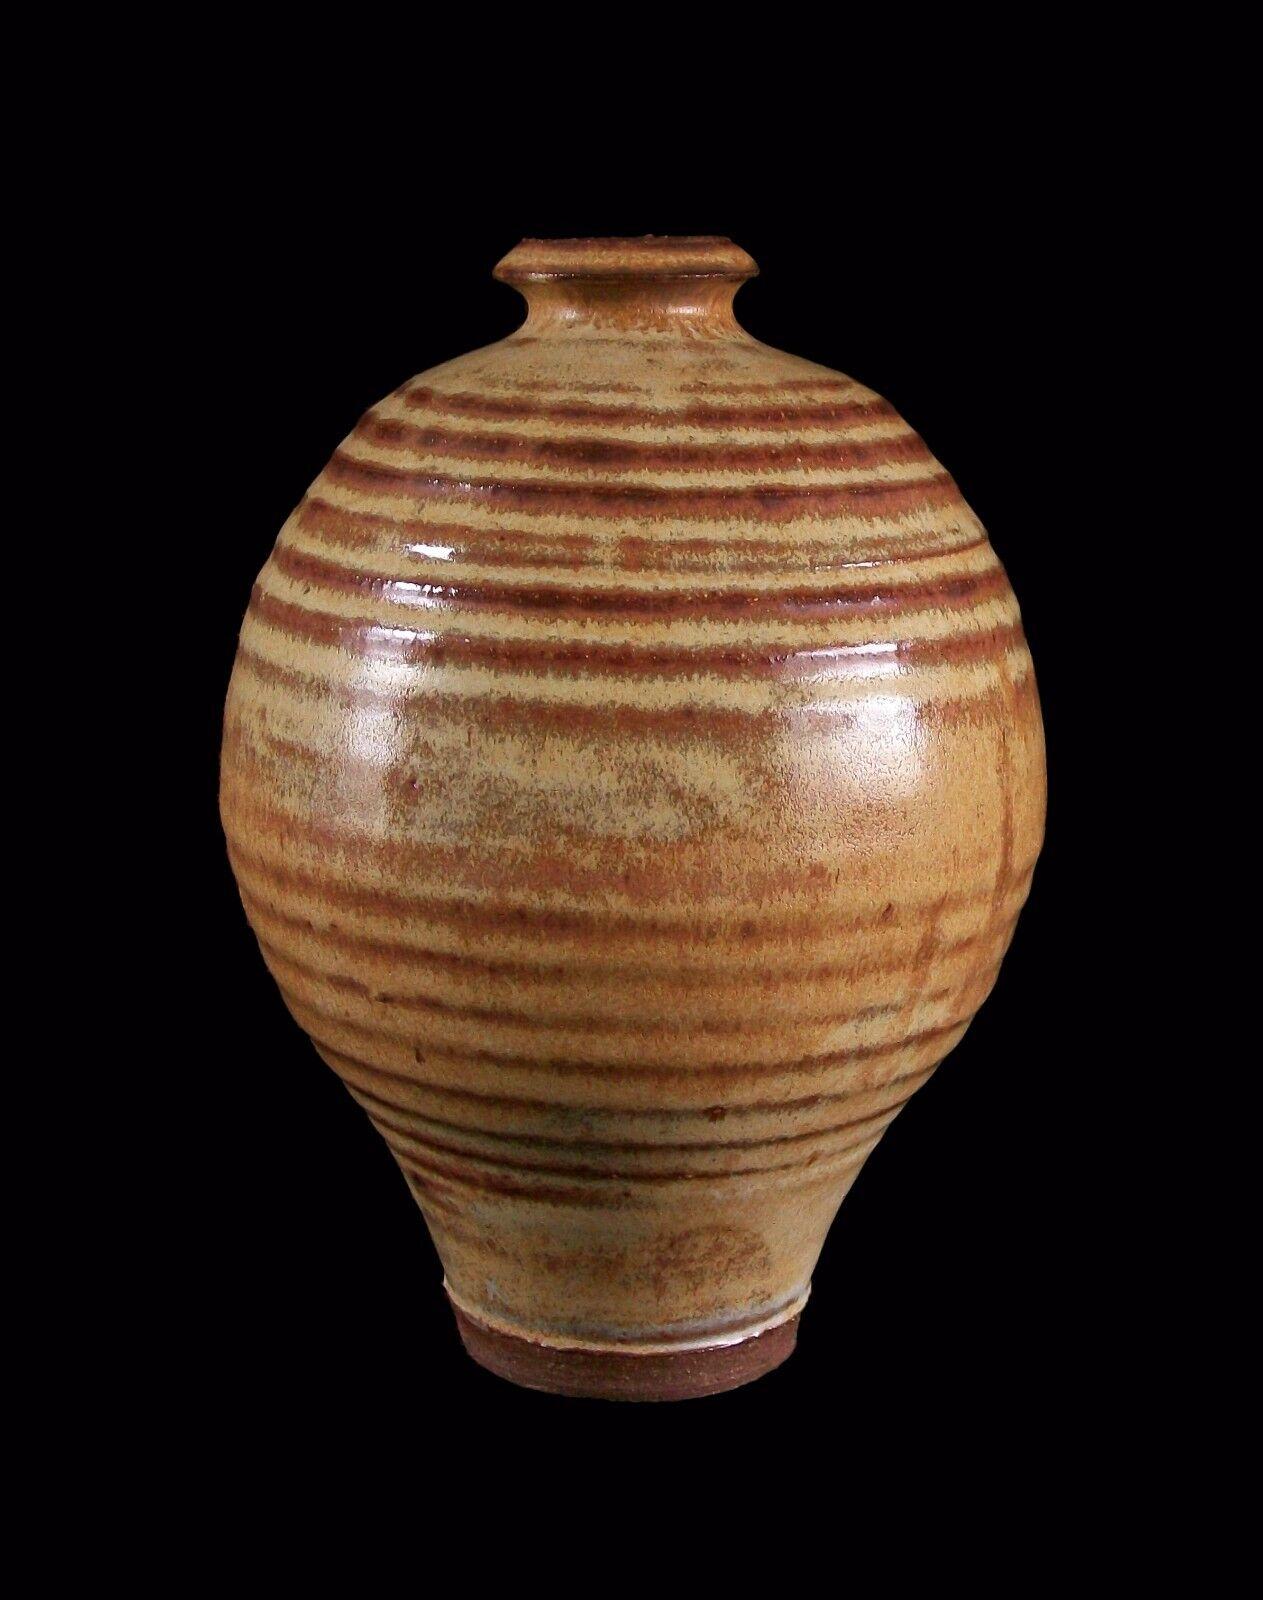 Vintage terracotta wheel thrown studio pottery vase - thick matte butterscotch glaze to the exterior stop precisely 3/8